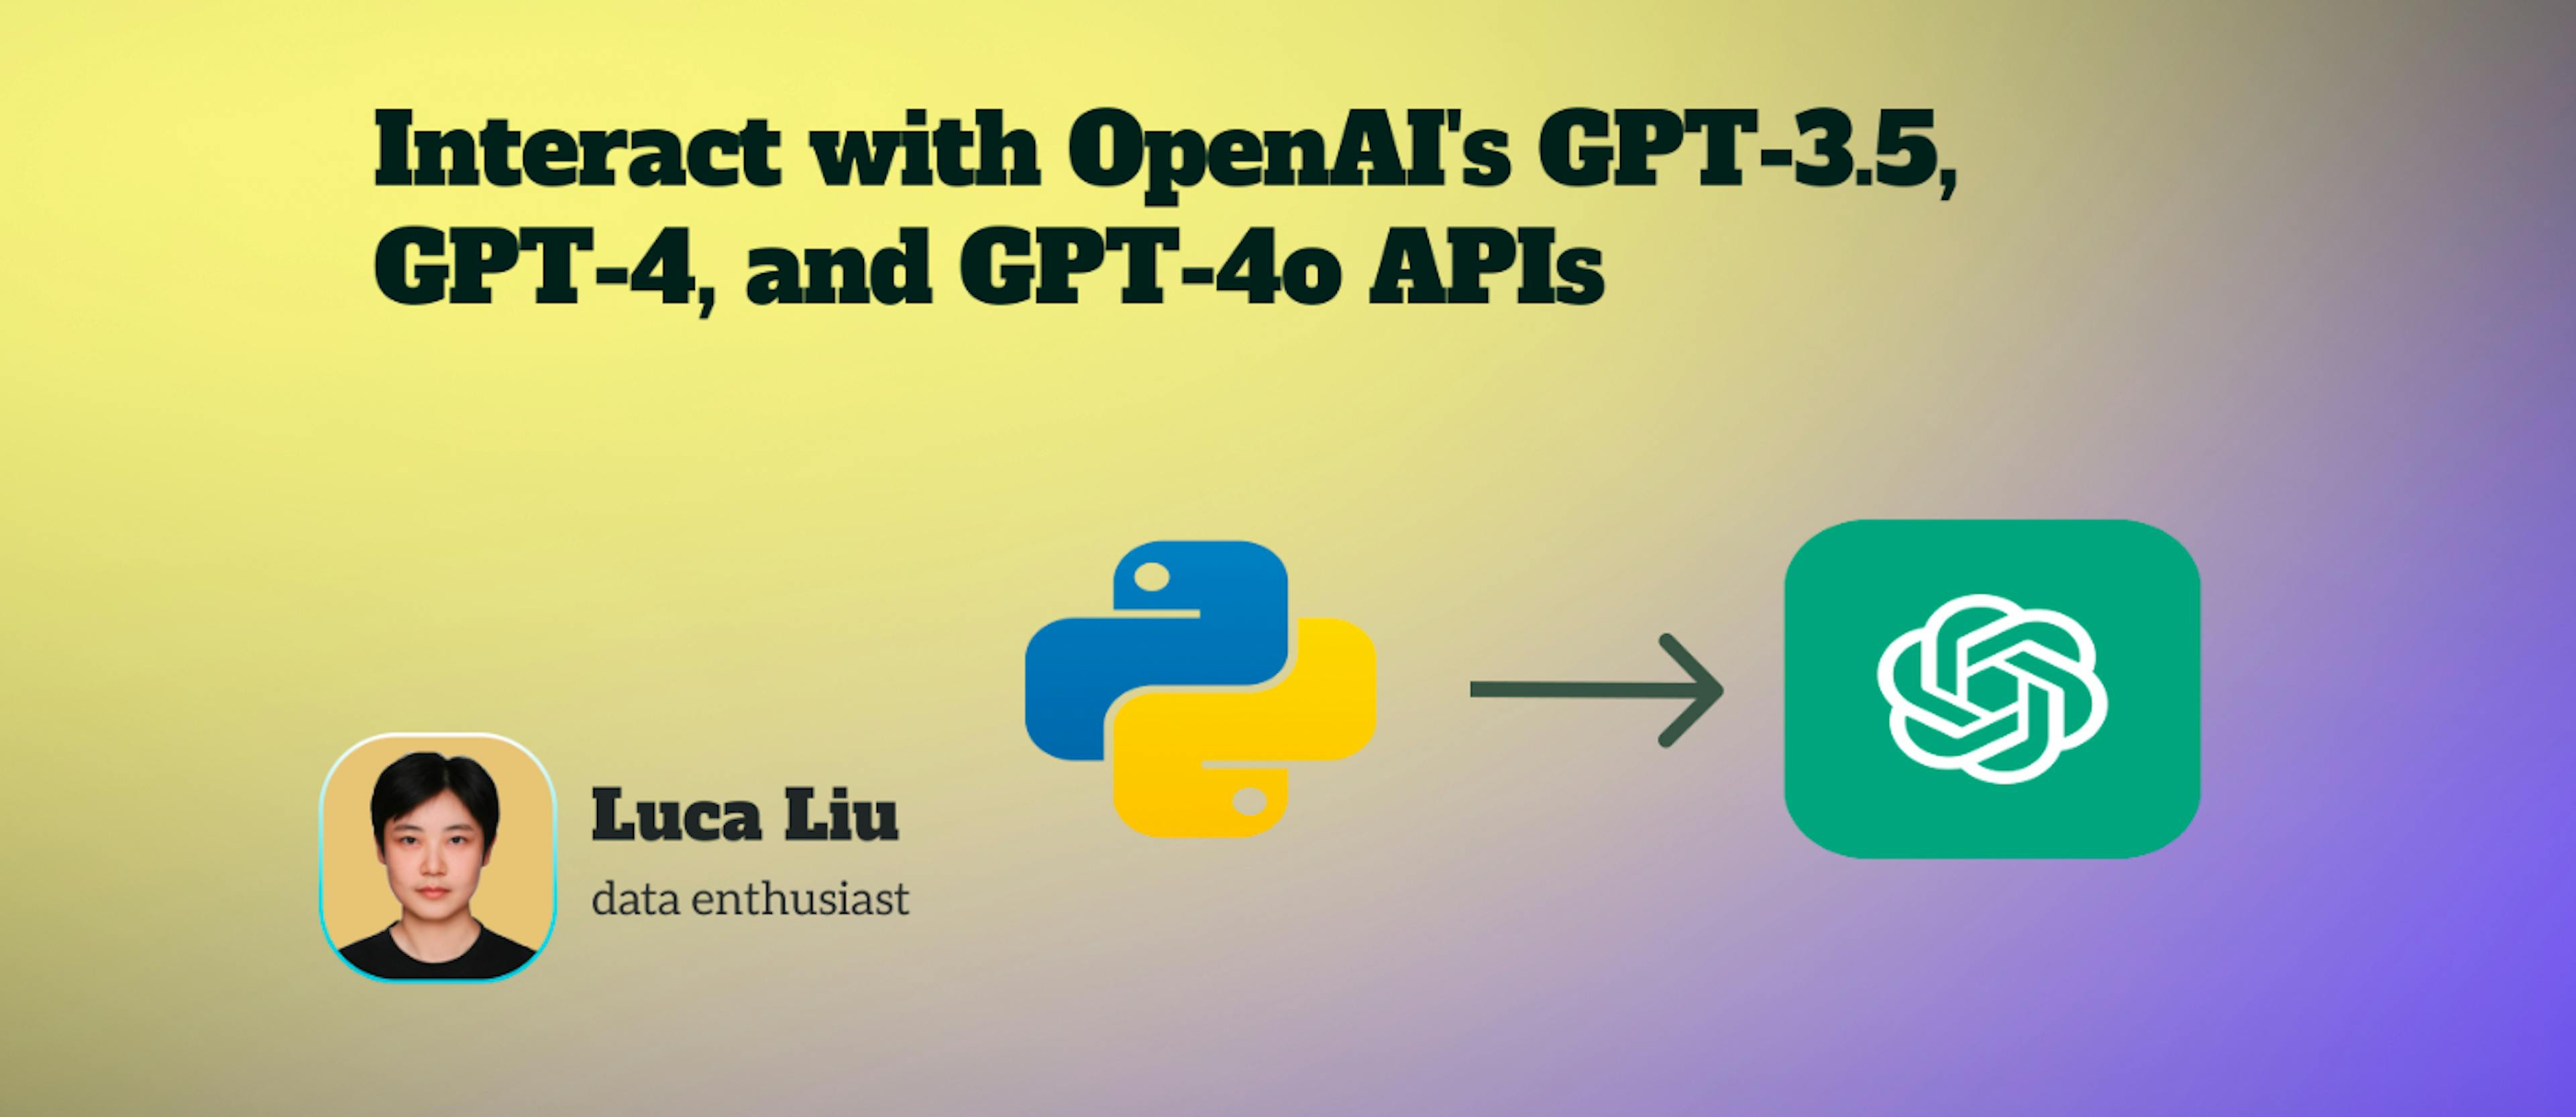 featured image - Using Python to Interact with OpenAI's GPT-3.5, GPT-4, and GPT-4o APIs